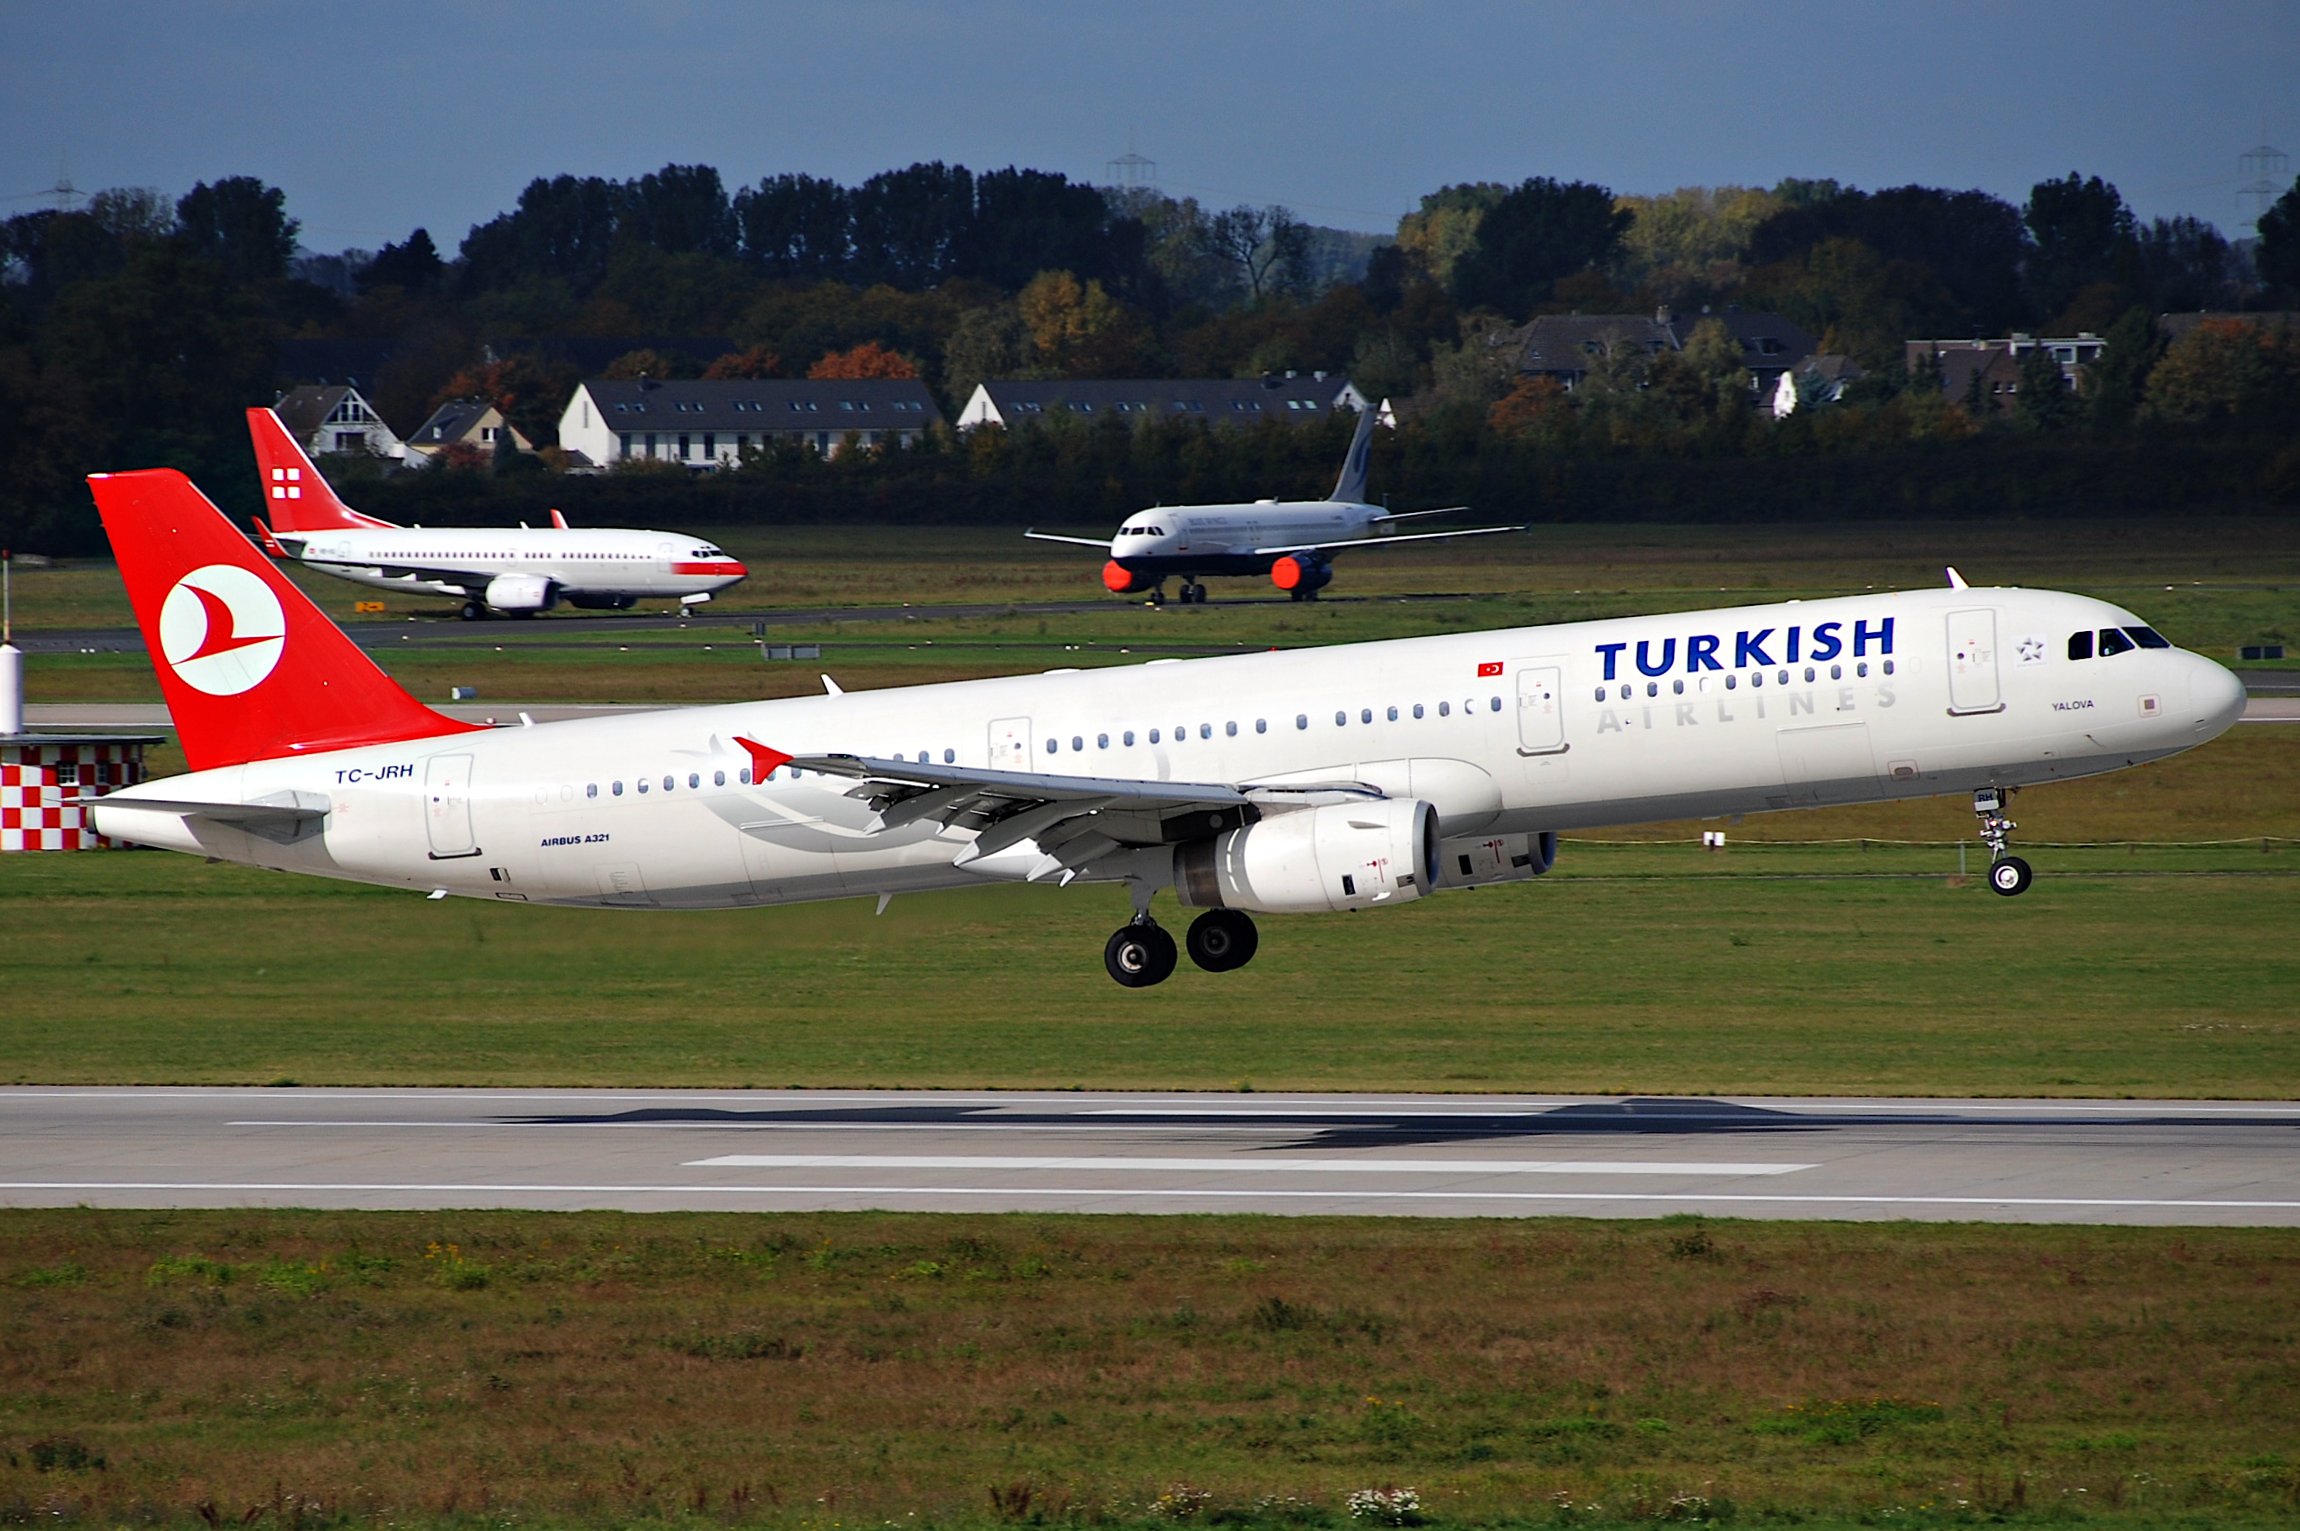 Turkish Airlines Airbus A321-231, TC-JRH@DUS,13.10.2009-558hd - Flickr - Aero Icarus